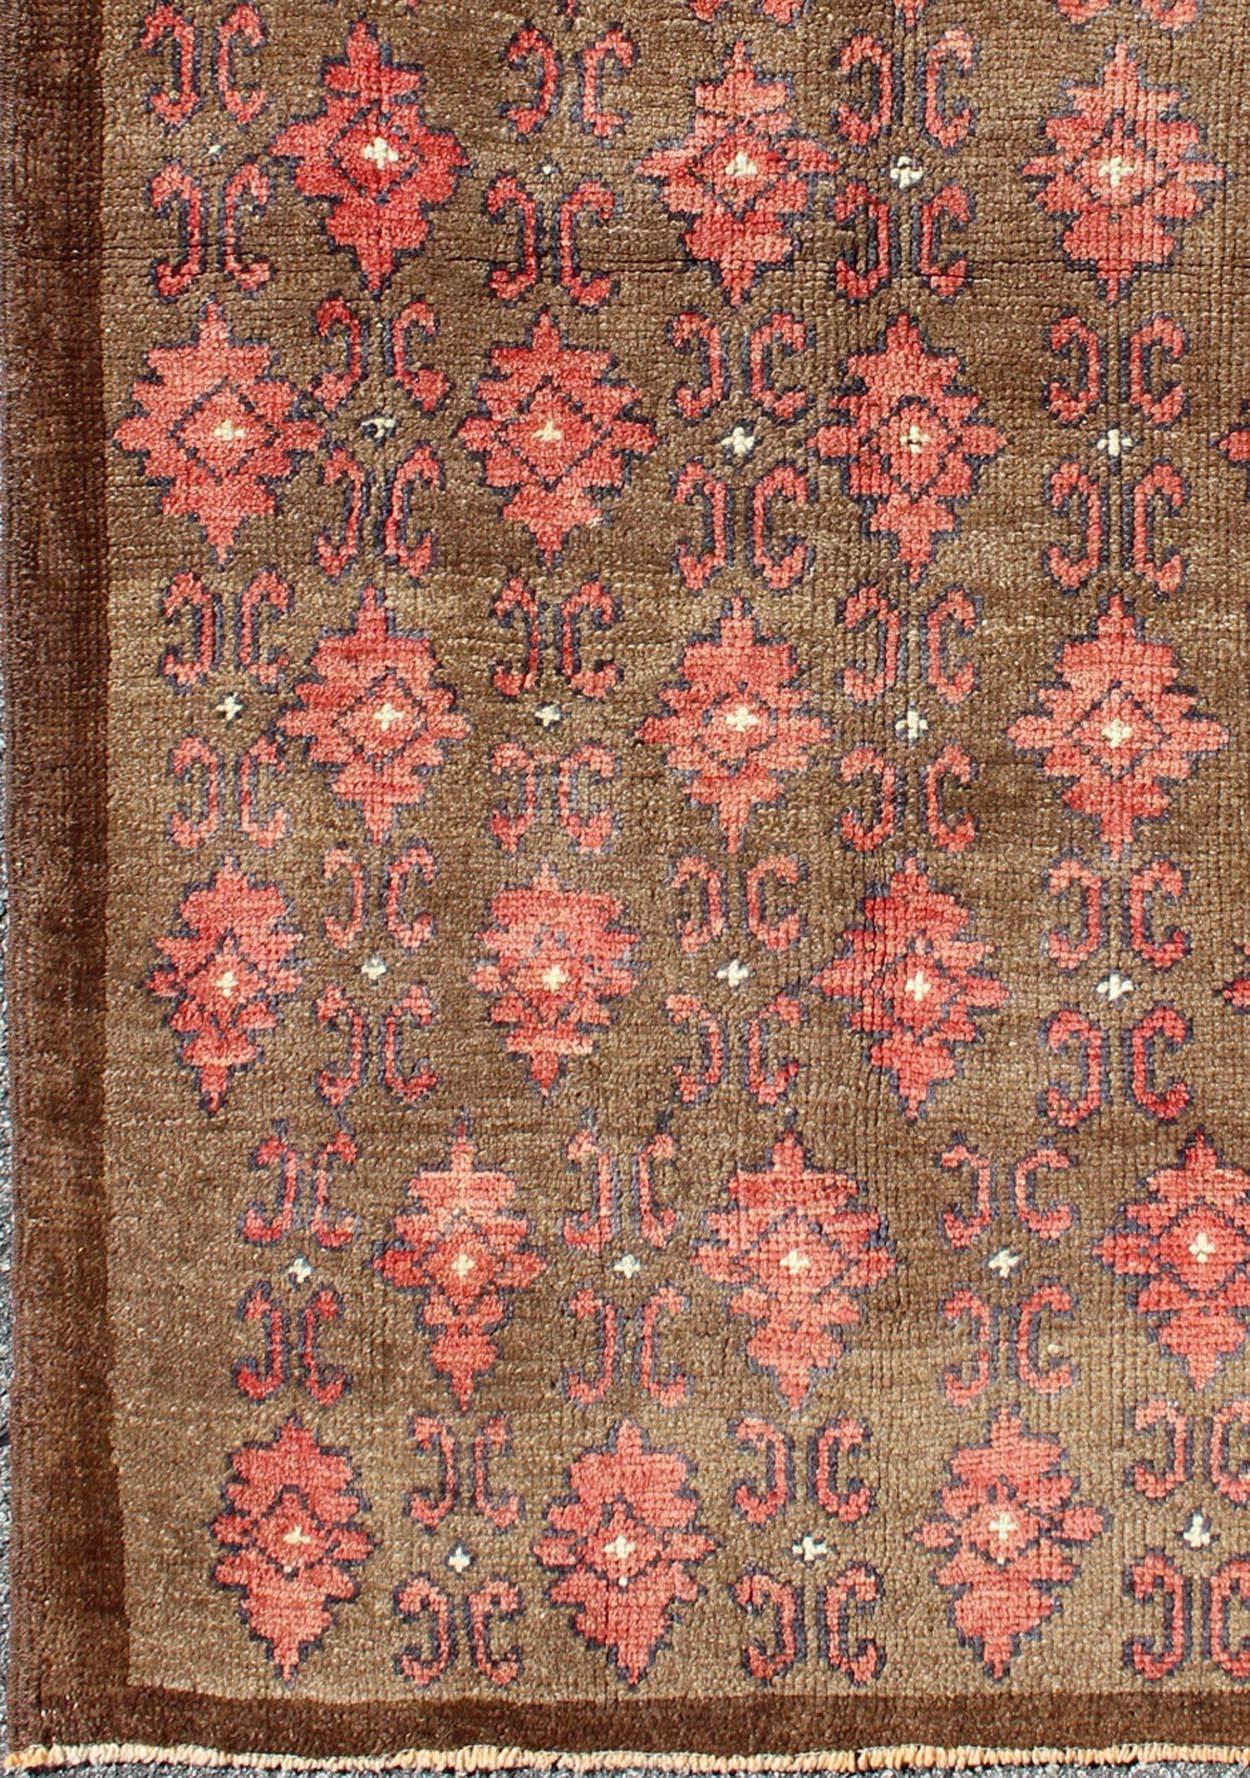 Red and brown vintage Turkish Oushak rug with repeating vertical motif design, rug en-115273, country of origin / type: Turkey / Oushak, circa 1950

Set on a dark mocha brown field with an all-over pattern, this beautiful midcentury Turkish Oushak